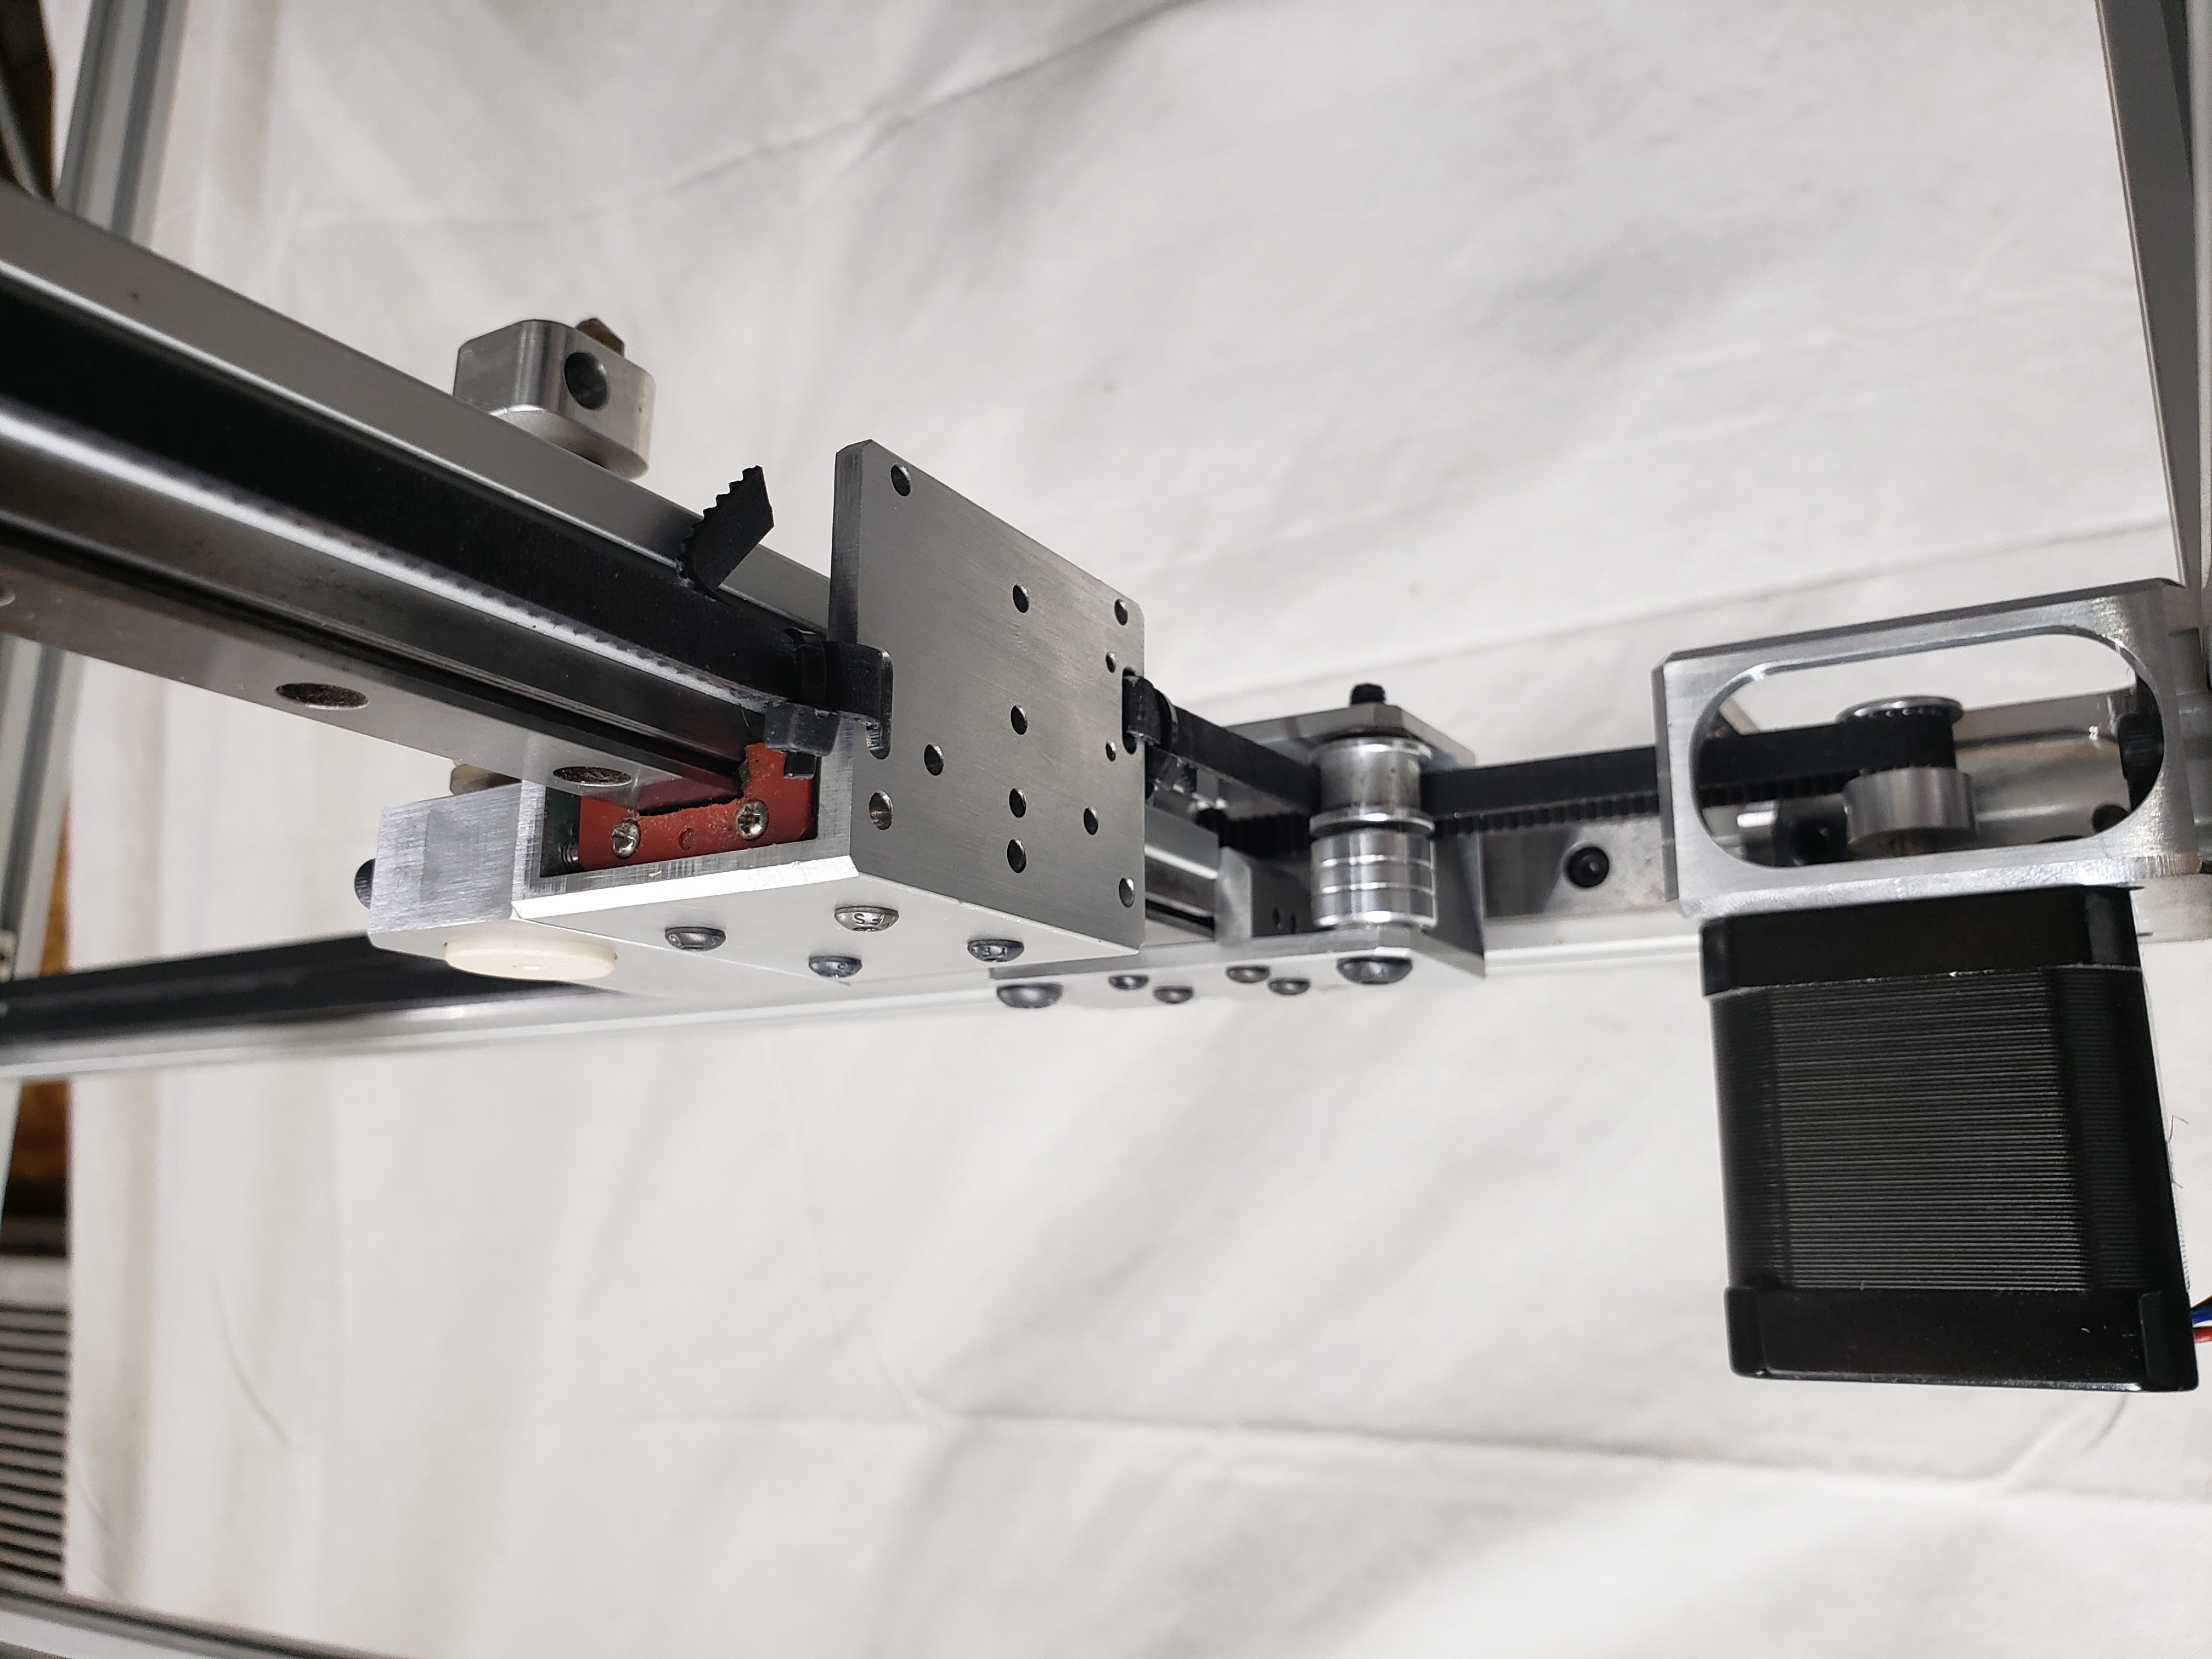 SolidCore CoreXY Y-Carriage or Extruder Carriage